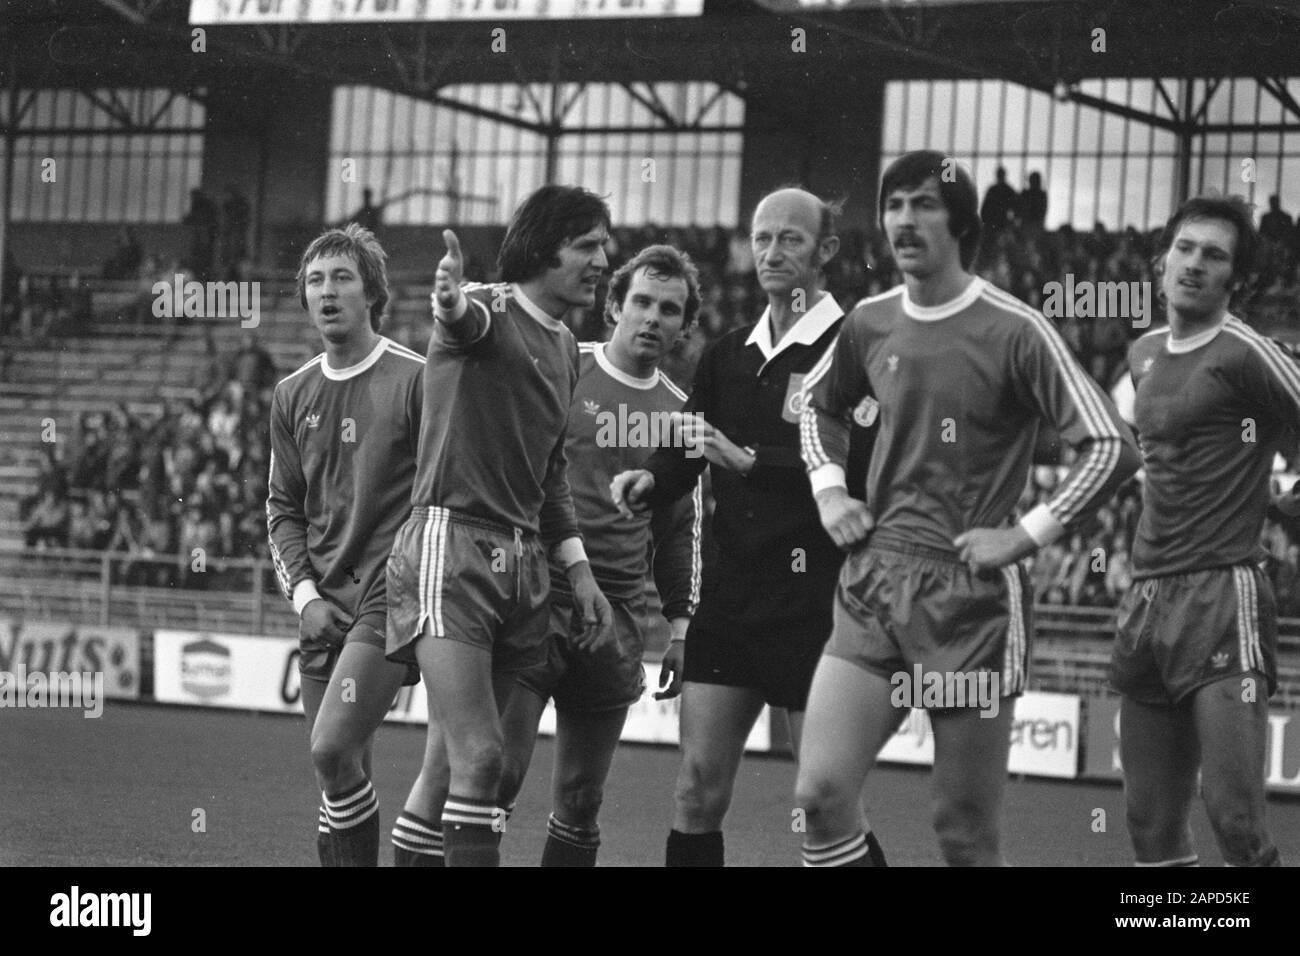 Ajax versus The Hague 3-2, referee Van Dijkers i discussion with players Date: 13 november 1977 Location: The Hague, Zuid-Holland Keywords: PLAYERS, referees, sport, football Institution name: AJAX Stock Photo